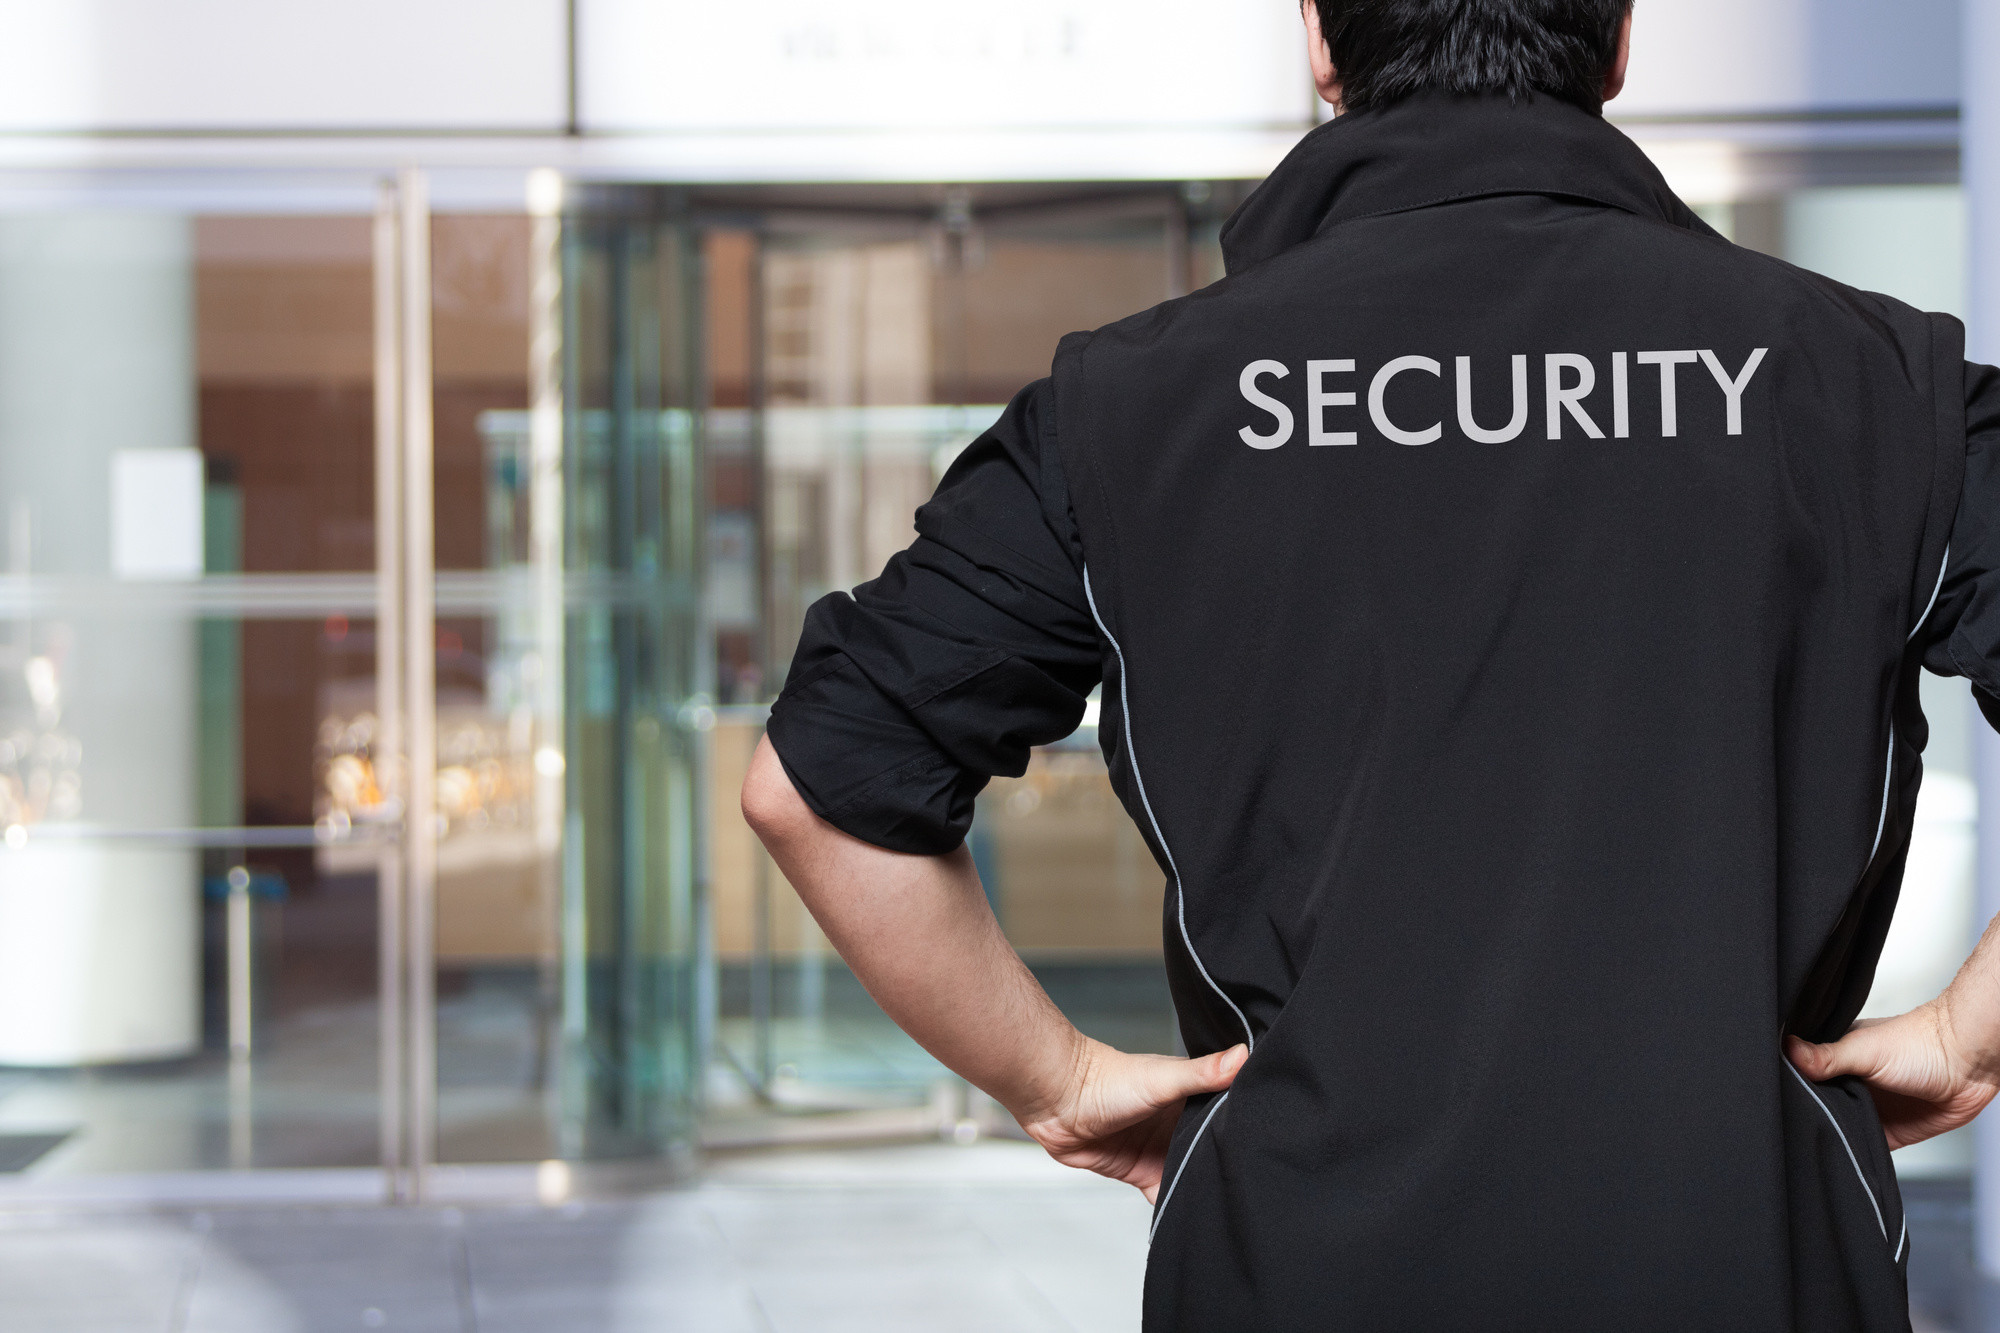 S4SECURITAS PVT LTD - Latest update - SECURITY SUPERVISOR FOR SHOPPING MALLS IN BANGALORE